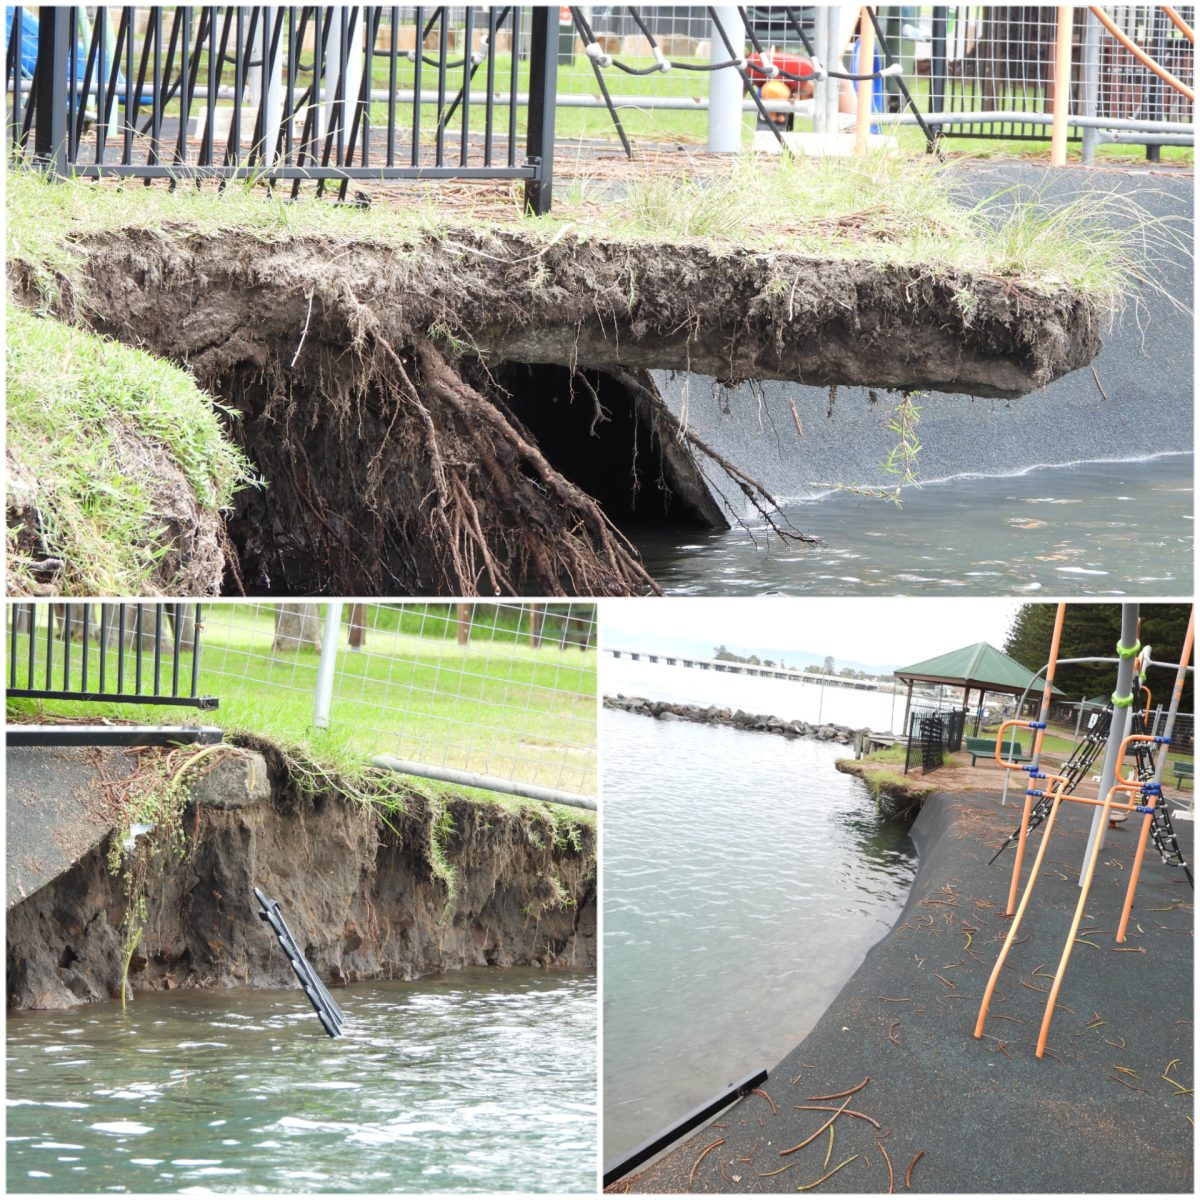 Compilation of photos showing erosion at the playground